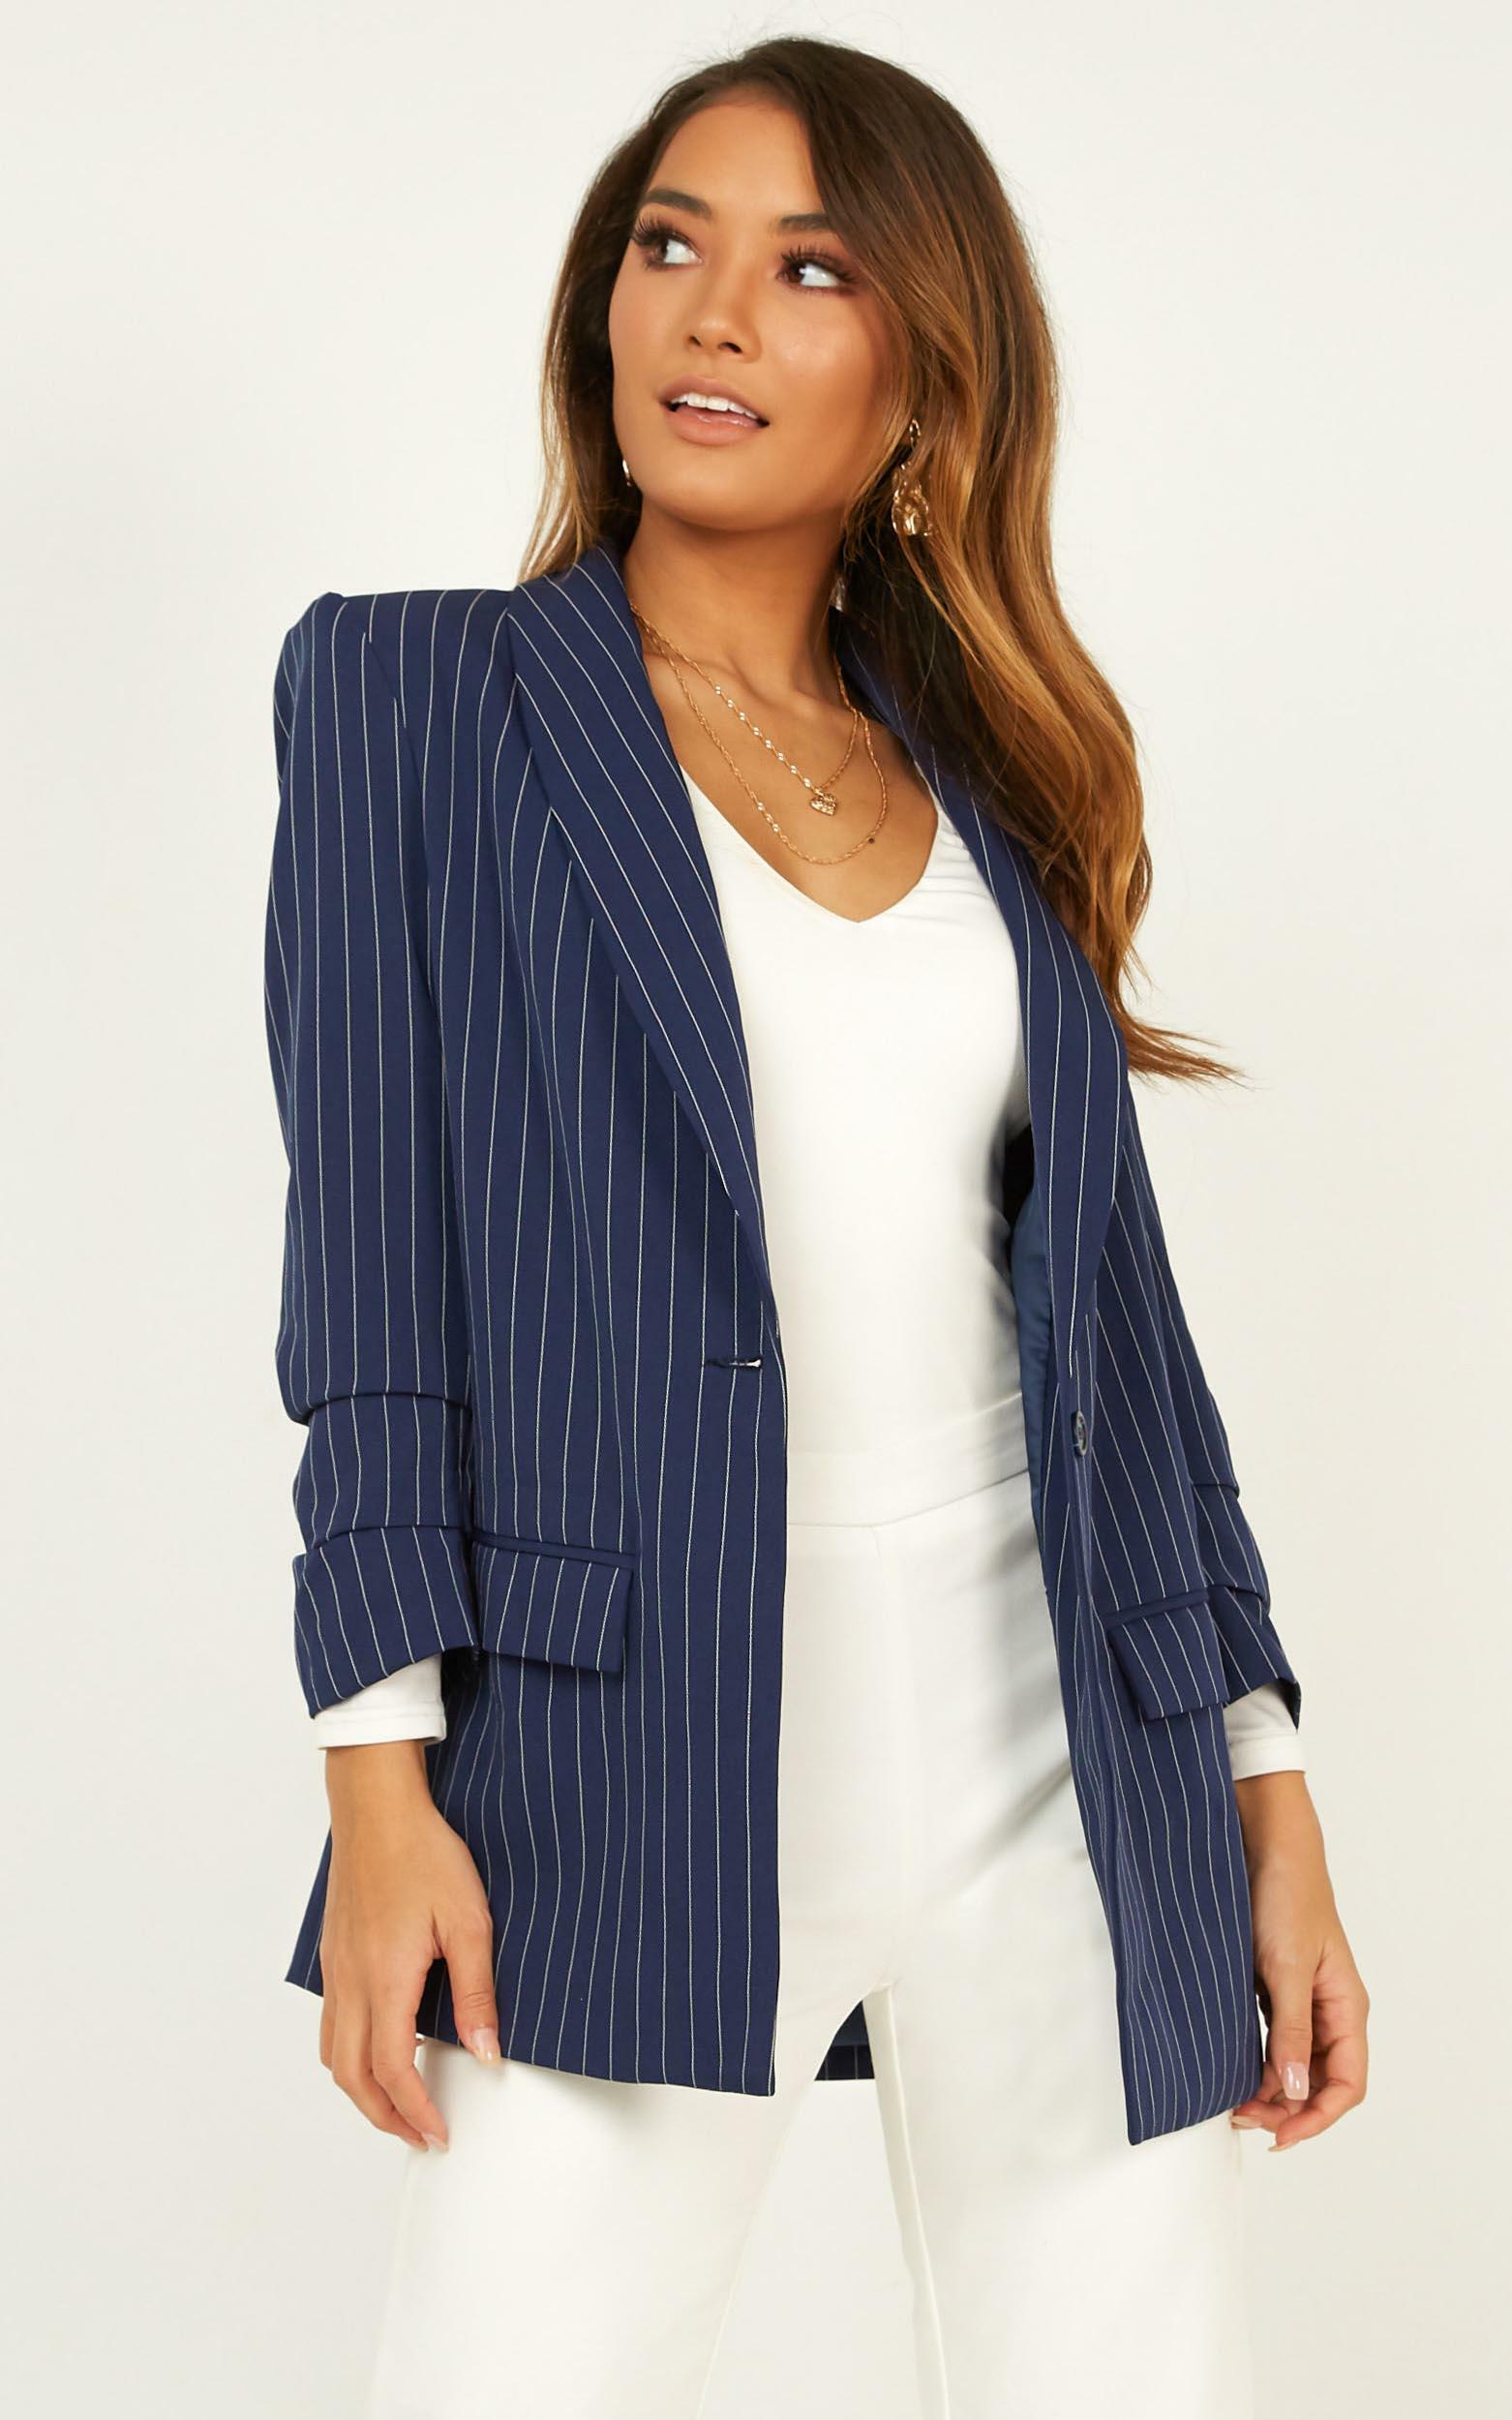 You Should Know Blazer In navy stripe - 16 (XXL), Navy, hi-res image number null